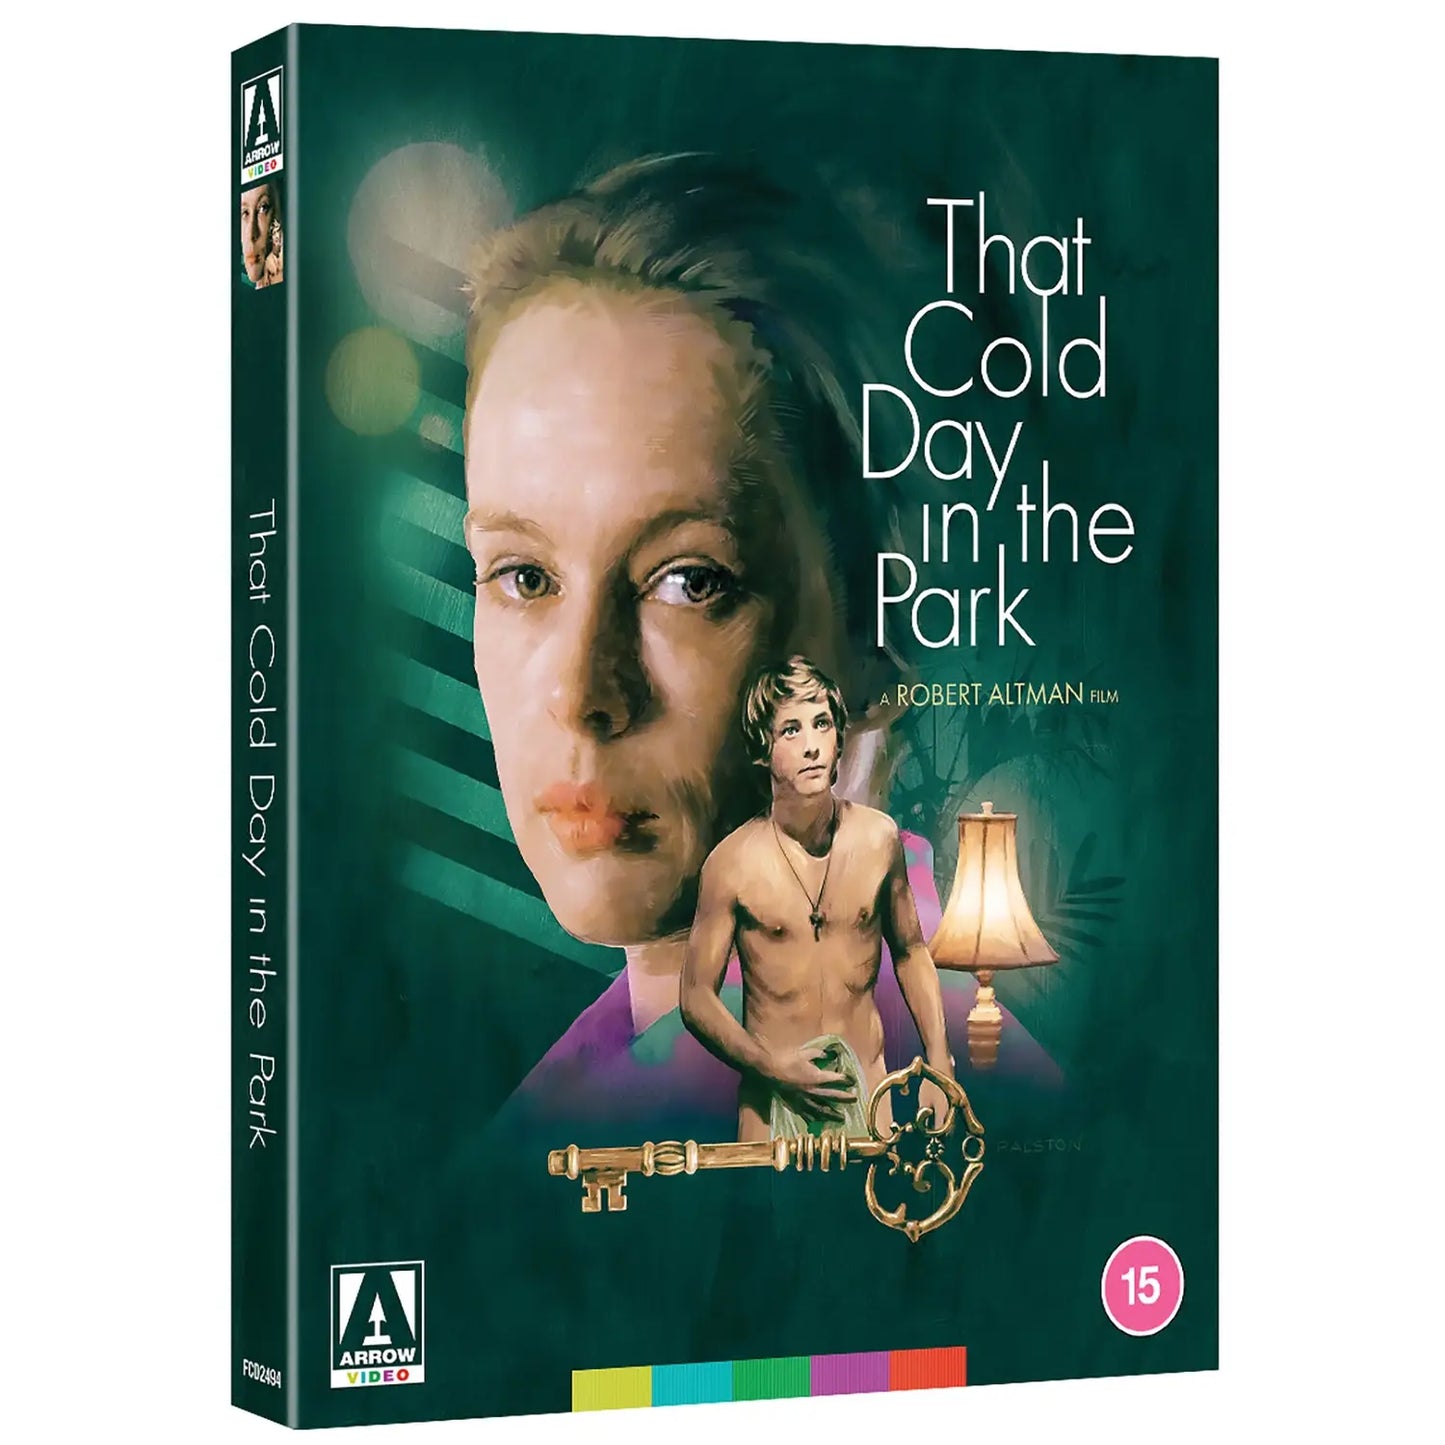 That Cold Day in the Park Limited Edition Blu-ray with Slipcover (Arrow UK/Region B) [Preorder]